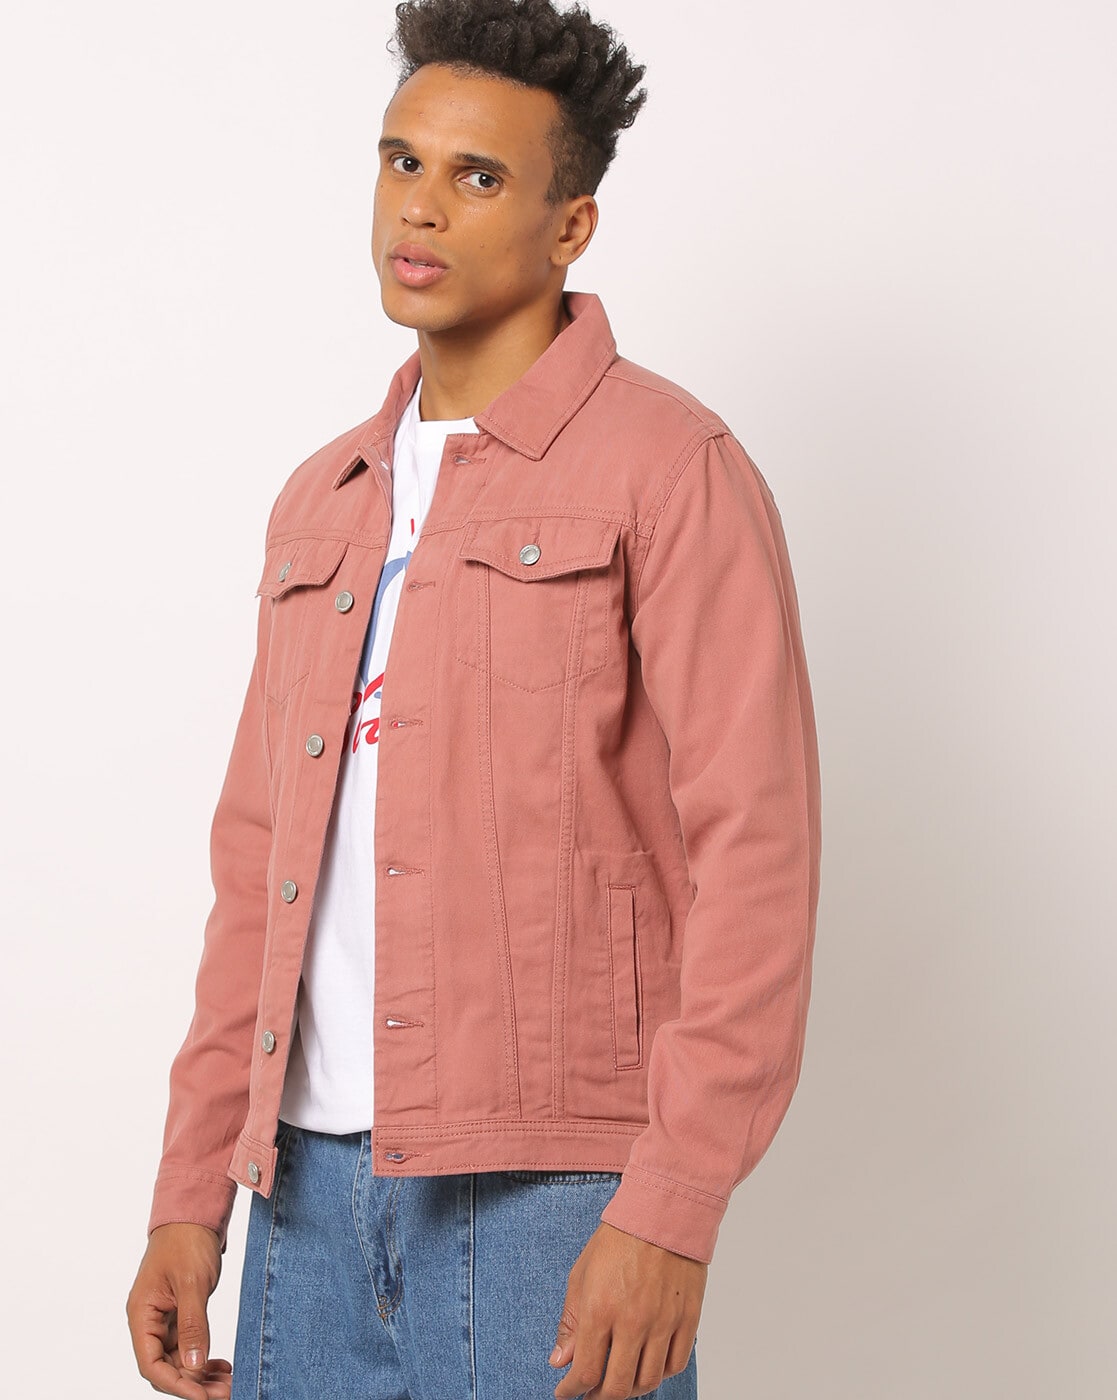 Dust Pink Casual Denim Jacket - Jackets & Coats | Country Road